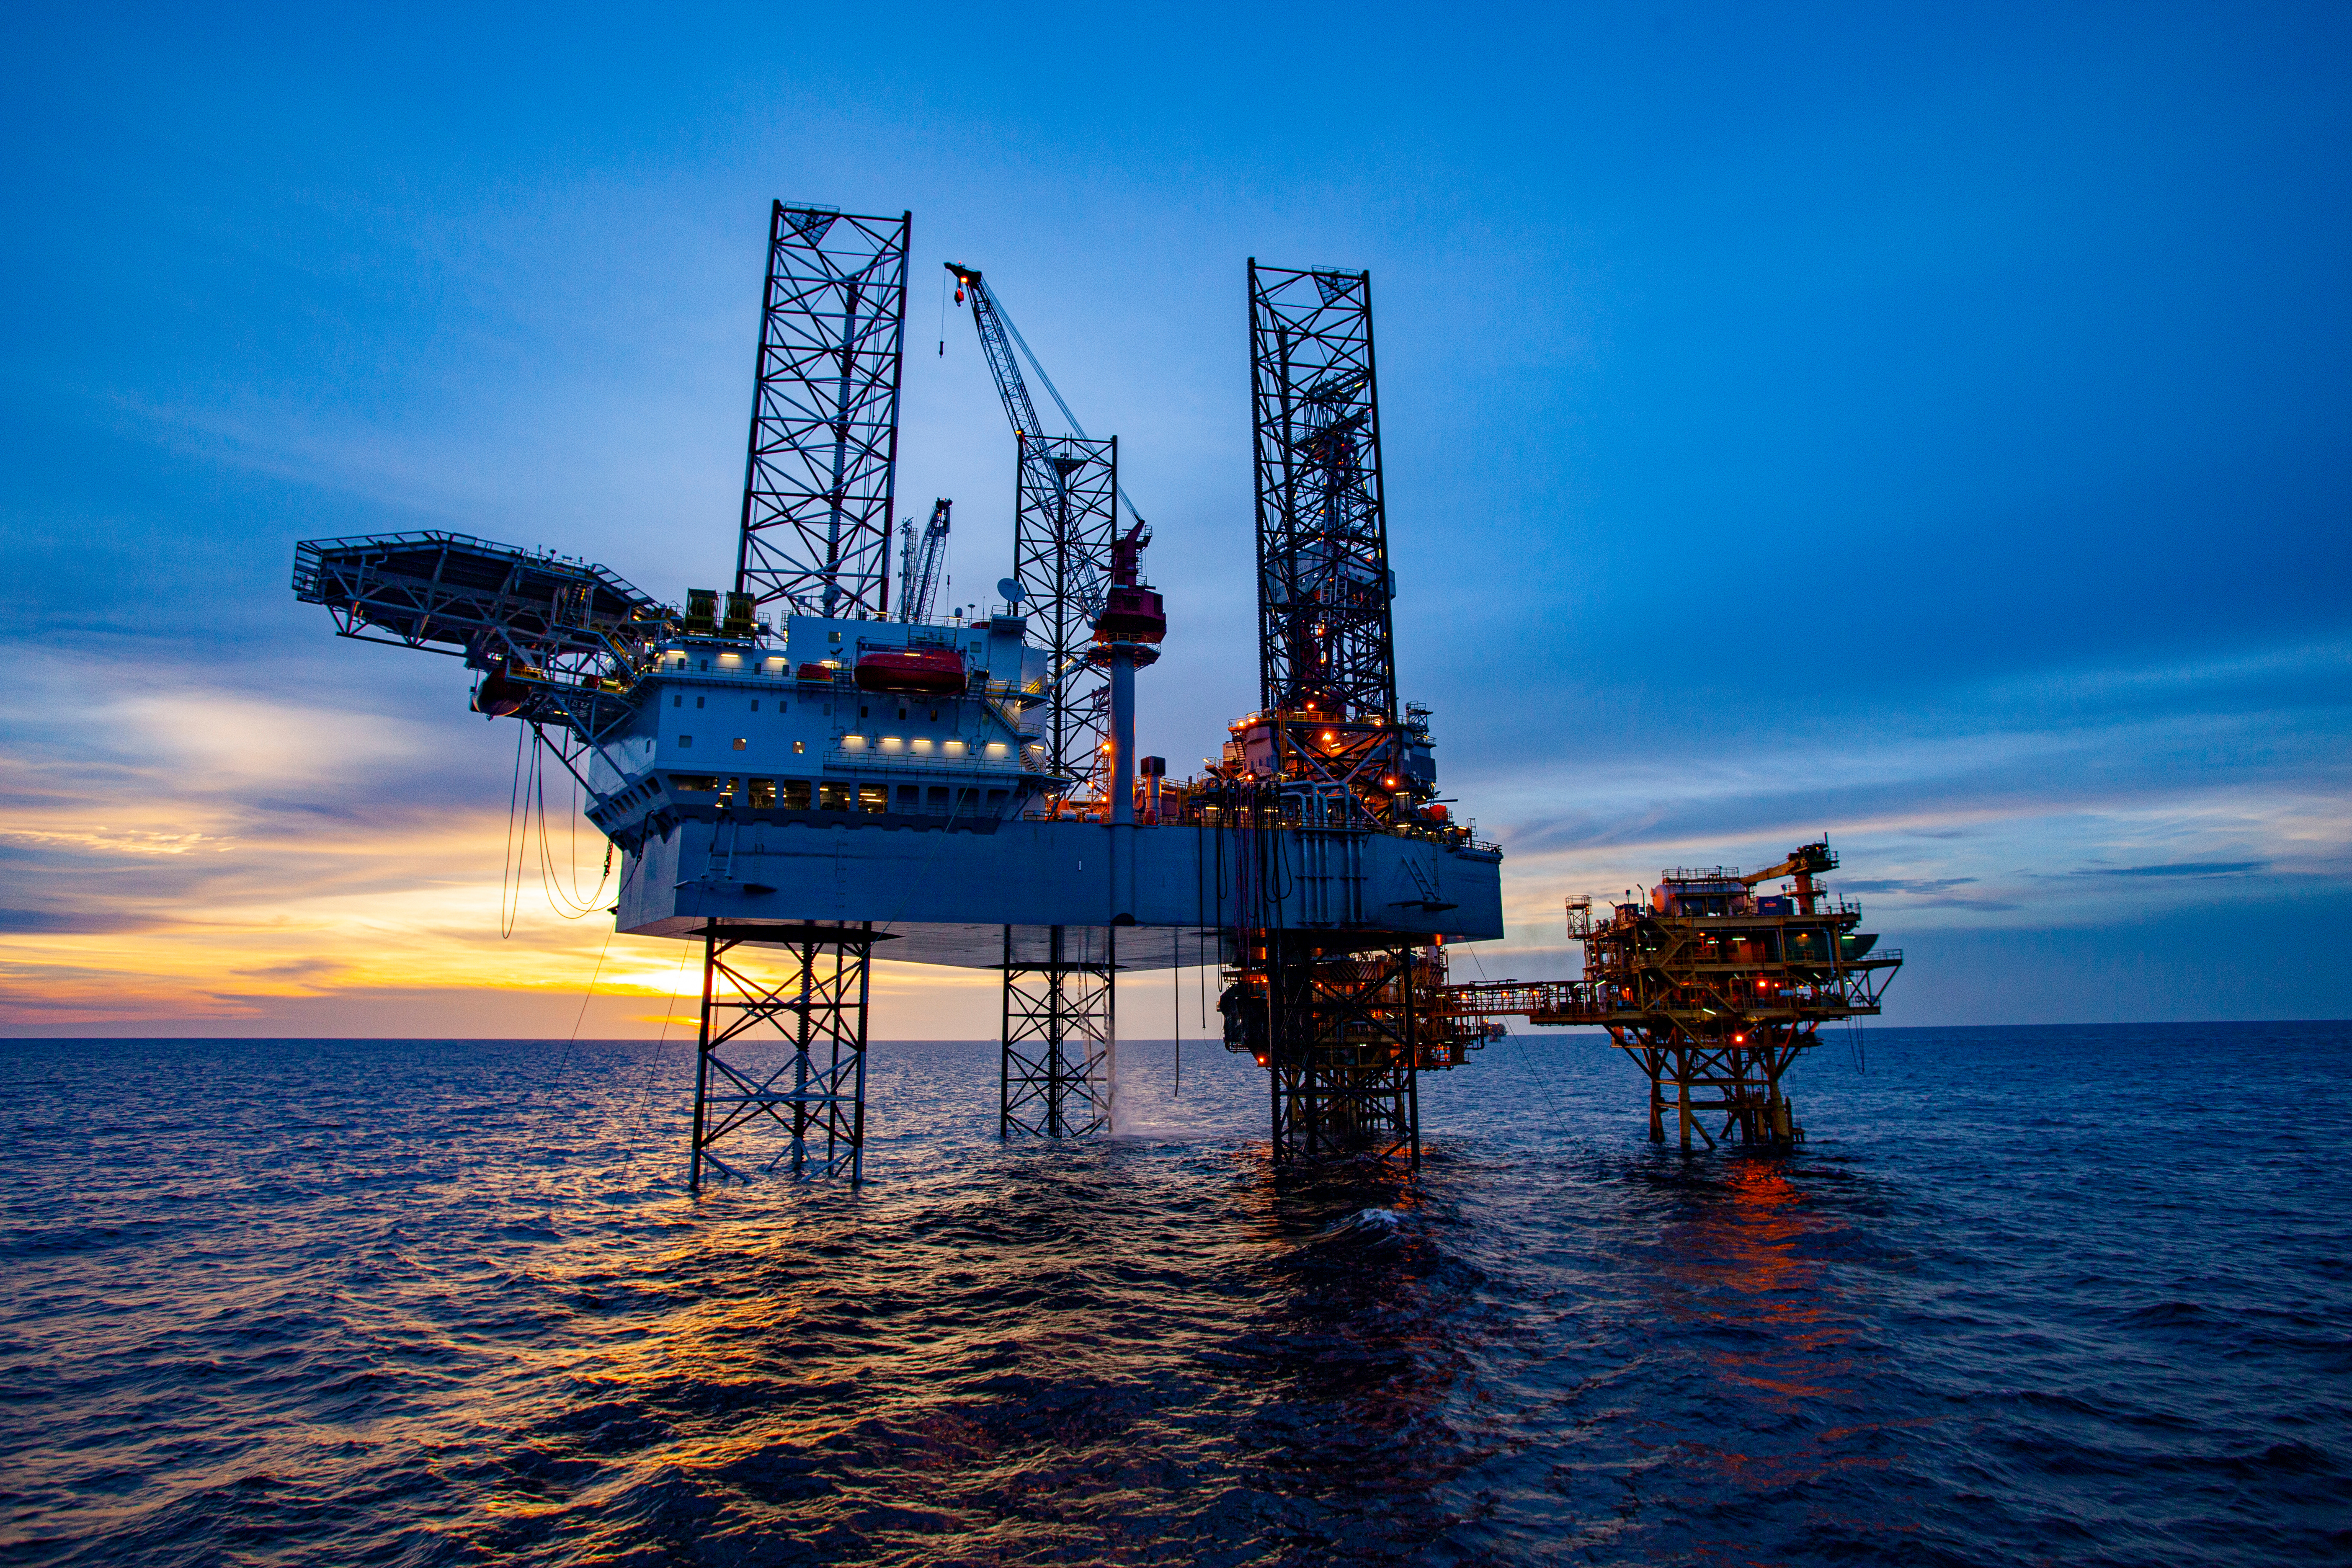 Making The Right Hire in the Oil, Gas, Energy & Resources (OGER) Industry